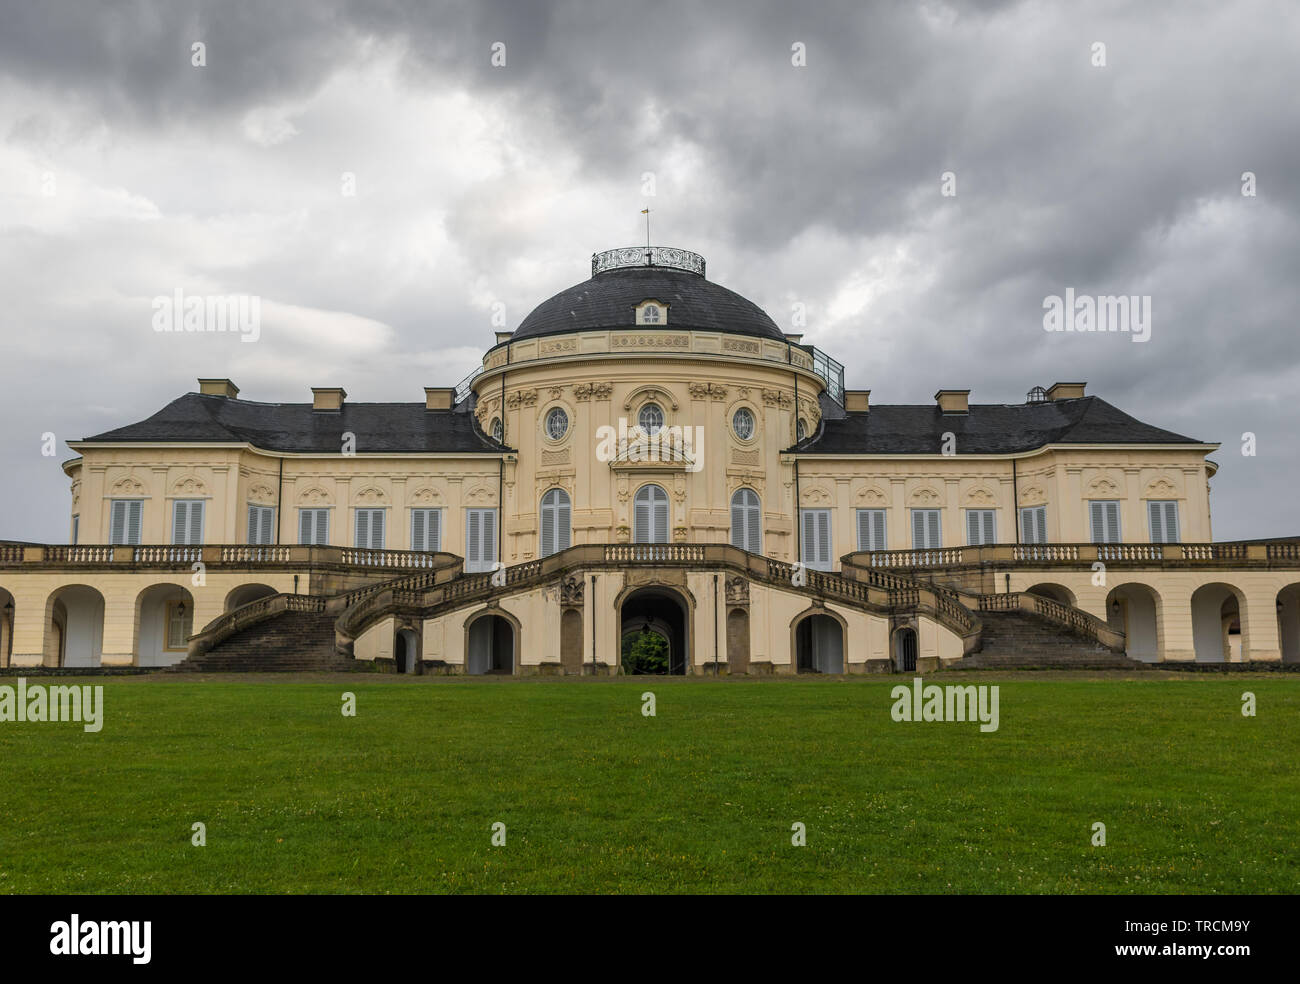 Stuttgart, Germany - capital of Baden-Württemberg, Stuttgard offers a wonderful mix of history and modernity. Here in particular the Solitude Palace Stock Photo